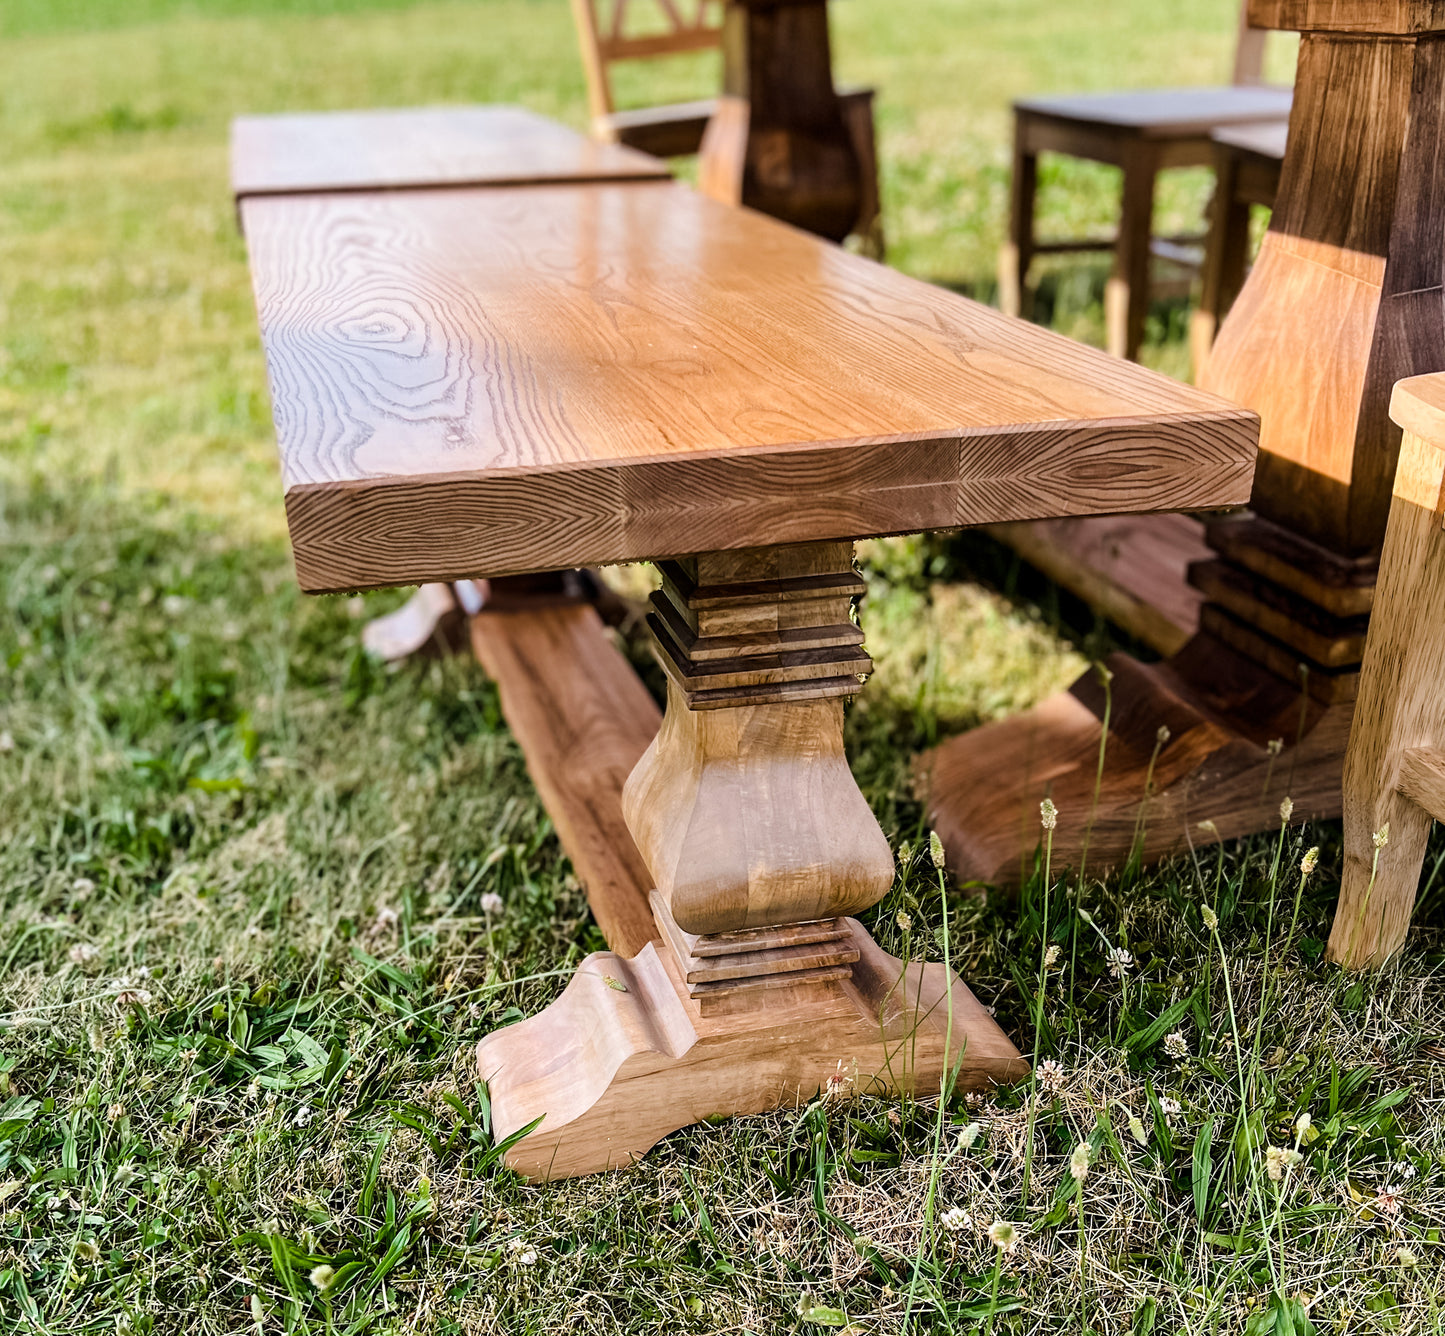 The May Pedestal Bench